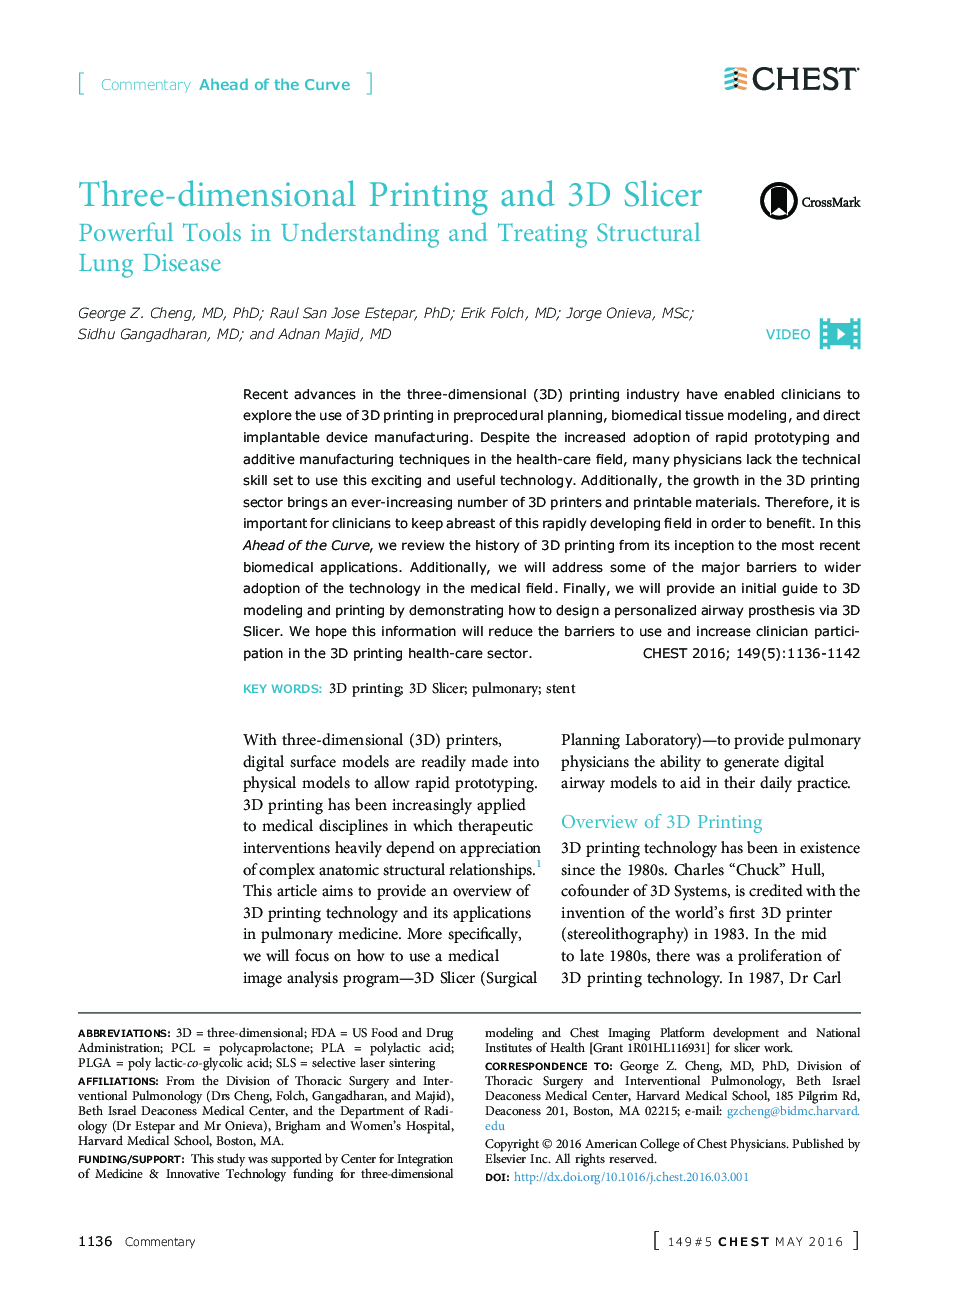 Three-dimensional Printing and 3D Slicer : Powerful Tools in Understanding and Treating Structural Lung Disease